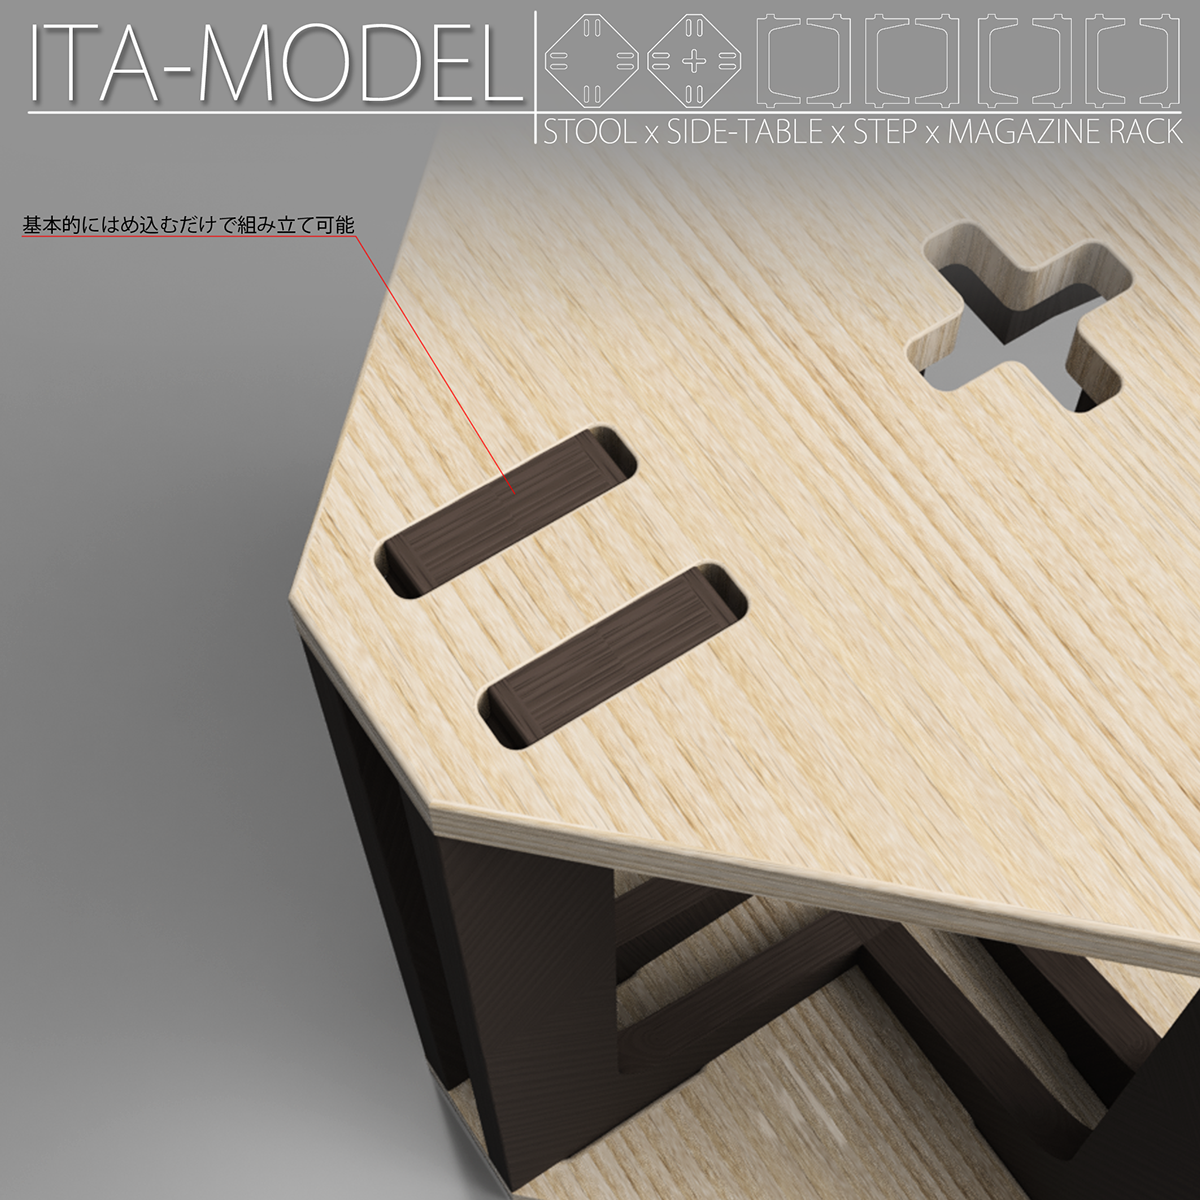 ASSEMBLY TYPE WOOD-STOOL x SIDE-TABLE DESIGN concept wood stool furniture side table step book shelf MODERN WOOD STOOL Plastic model